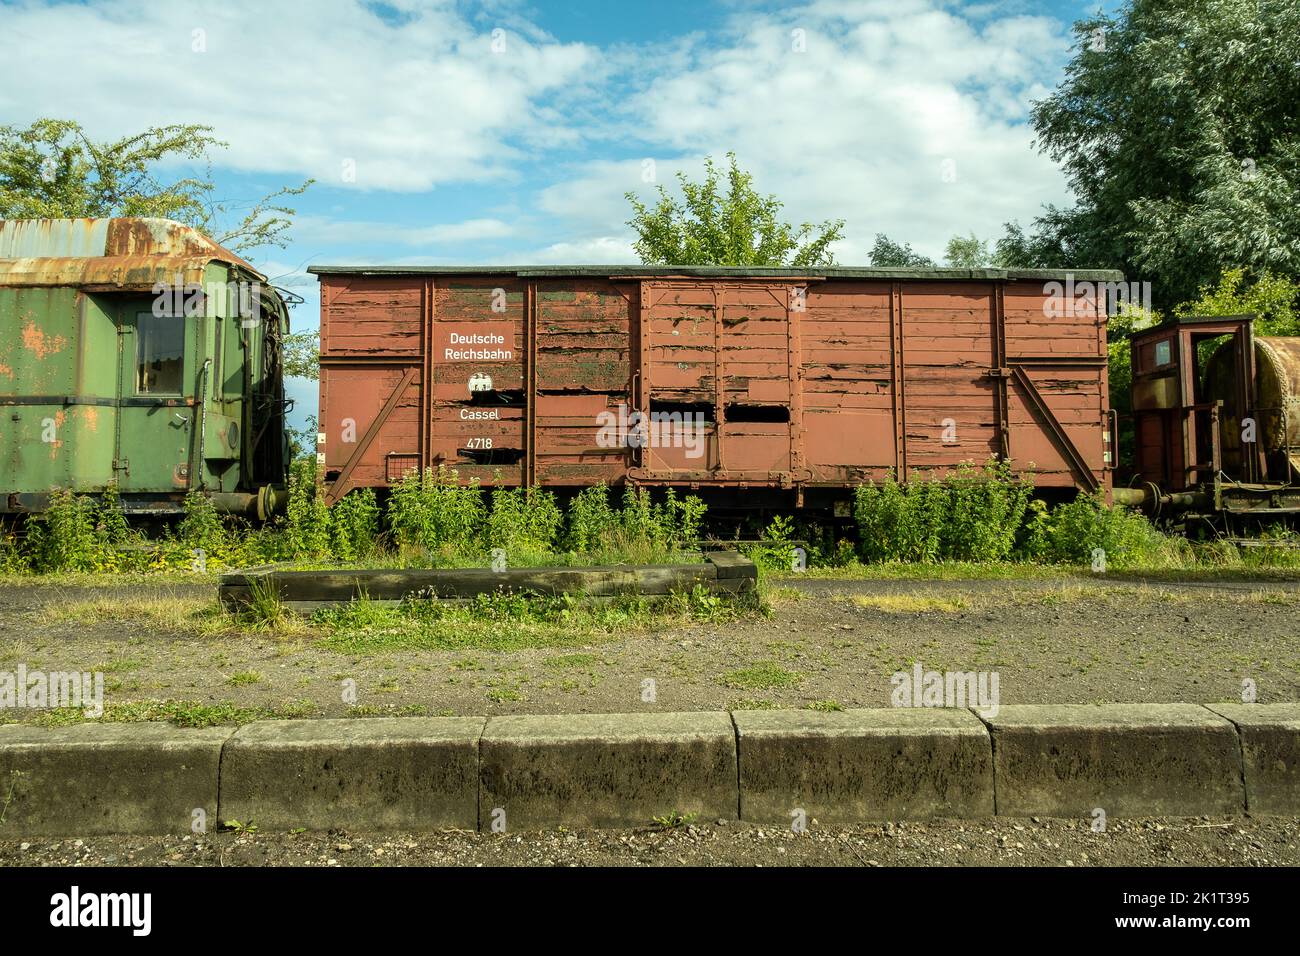 An old cargo train wagon in a train museum Stock Photo